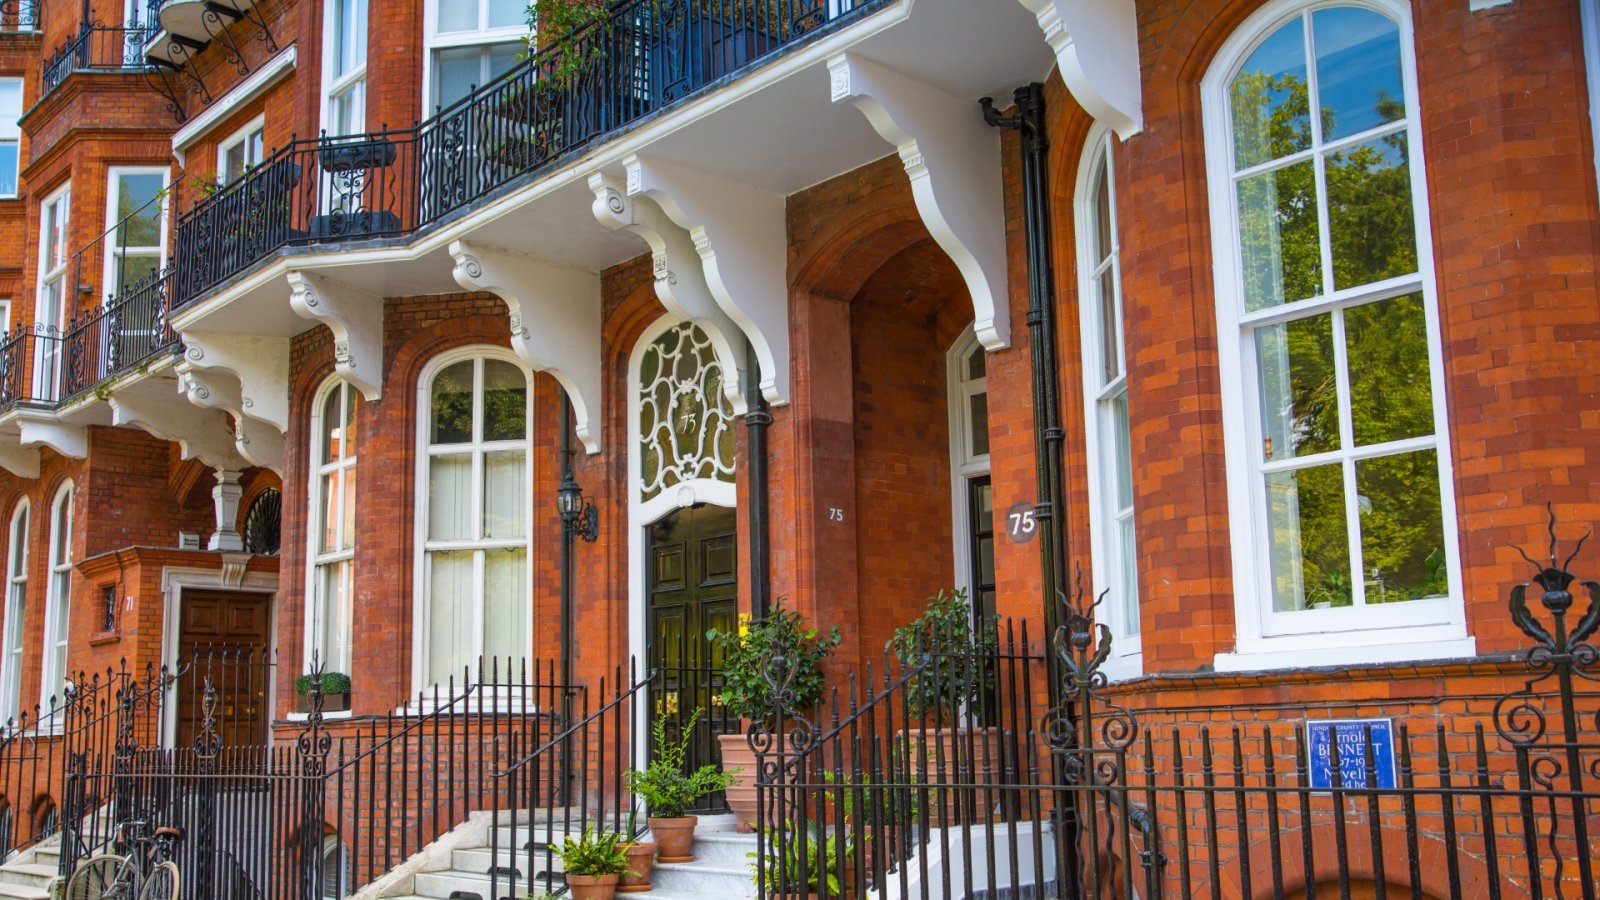 Discover this charming 19th-century luxurious brick mansion in London